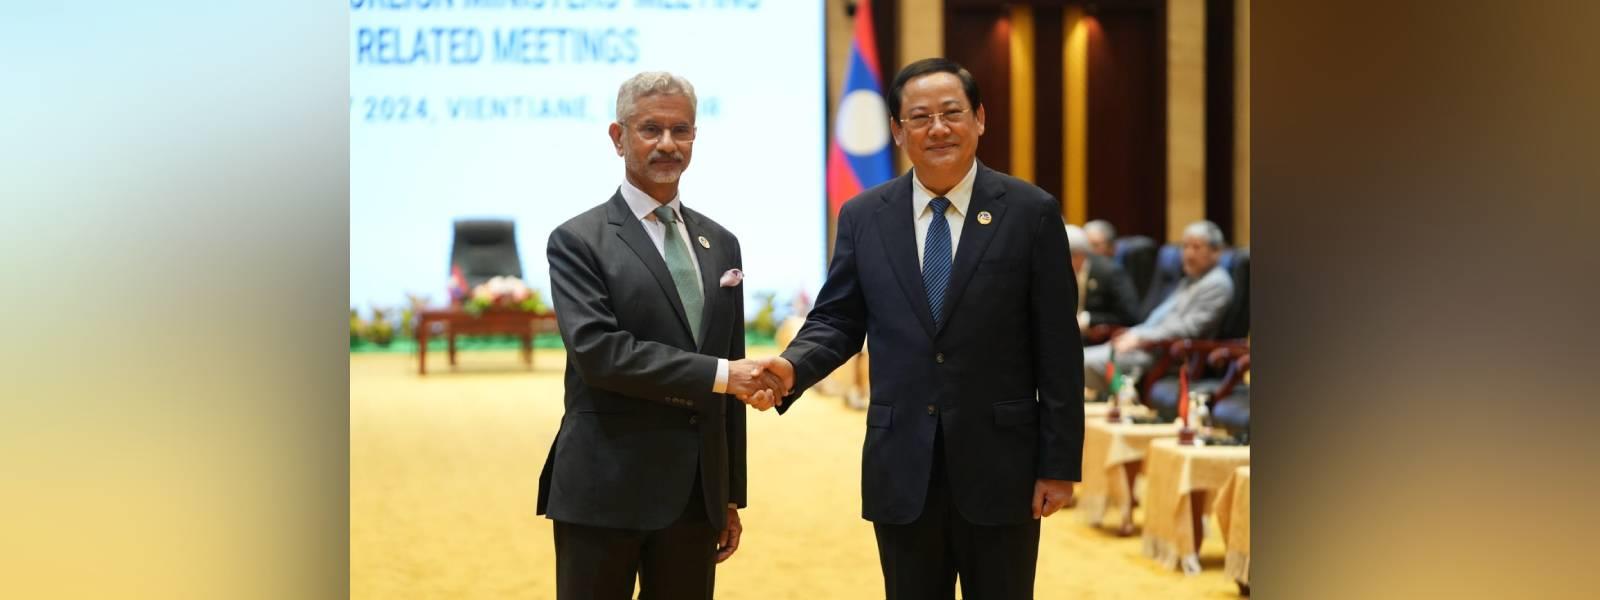 External Affairs Minister Dr. S Jaishankar called on Prime Minister of Lao PDR, H.E. Mr. Sonexay Siphandone in Vientiane